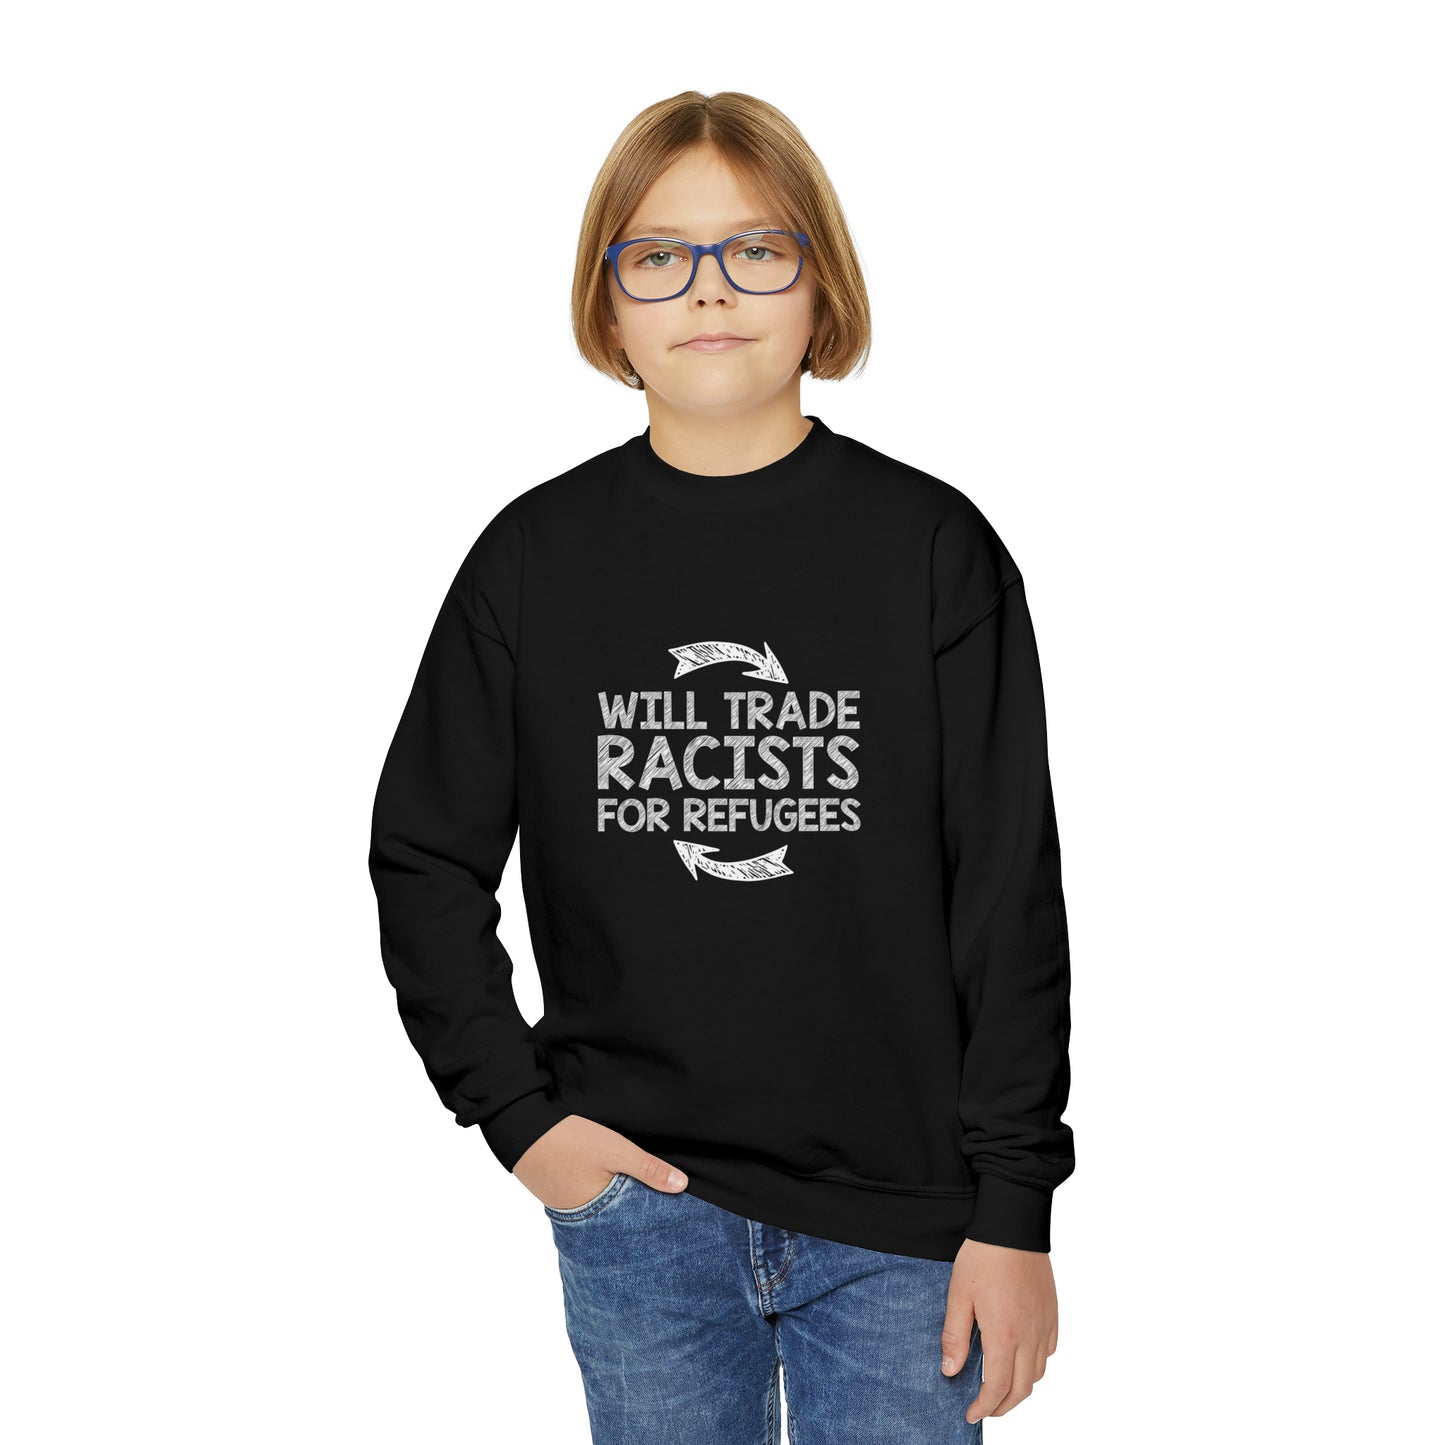 “Will Trade Racists for Refugees” Youth Sweatshirt